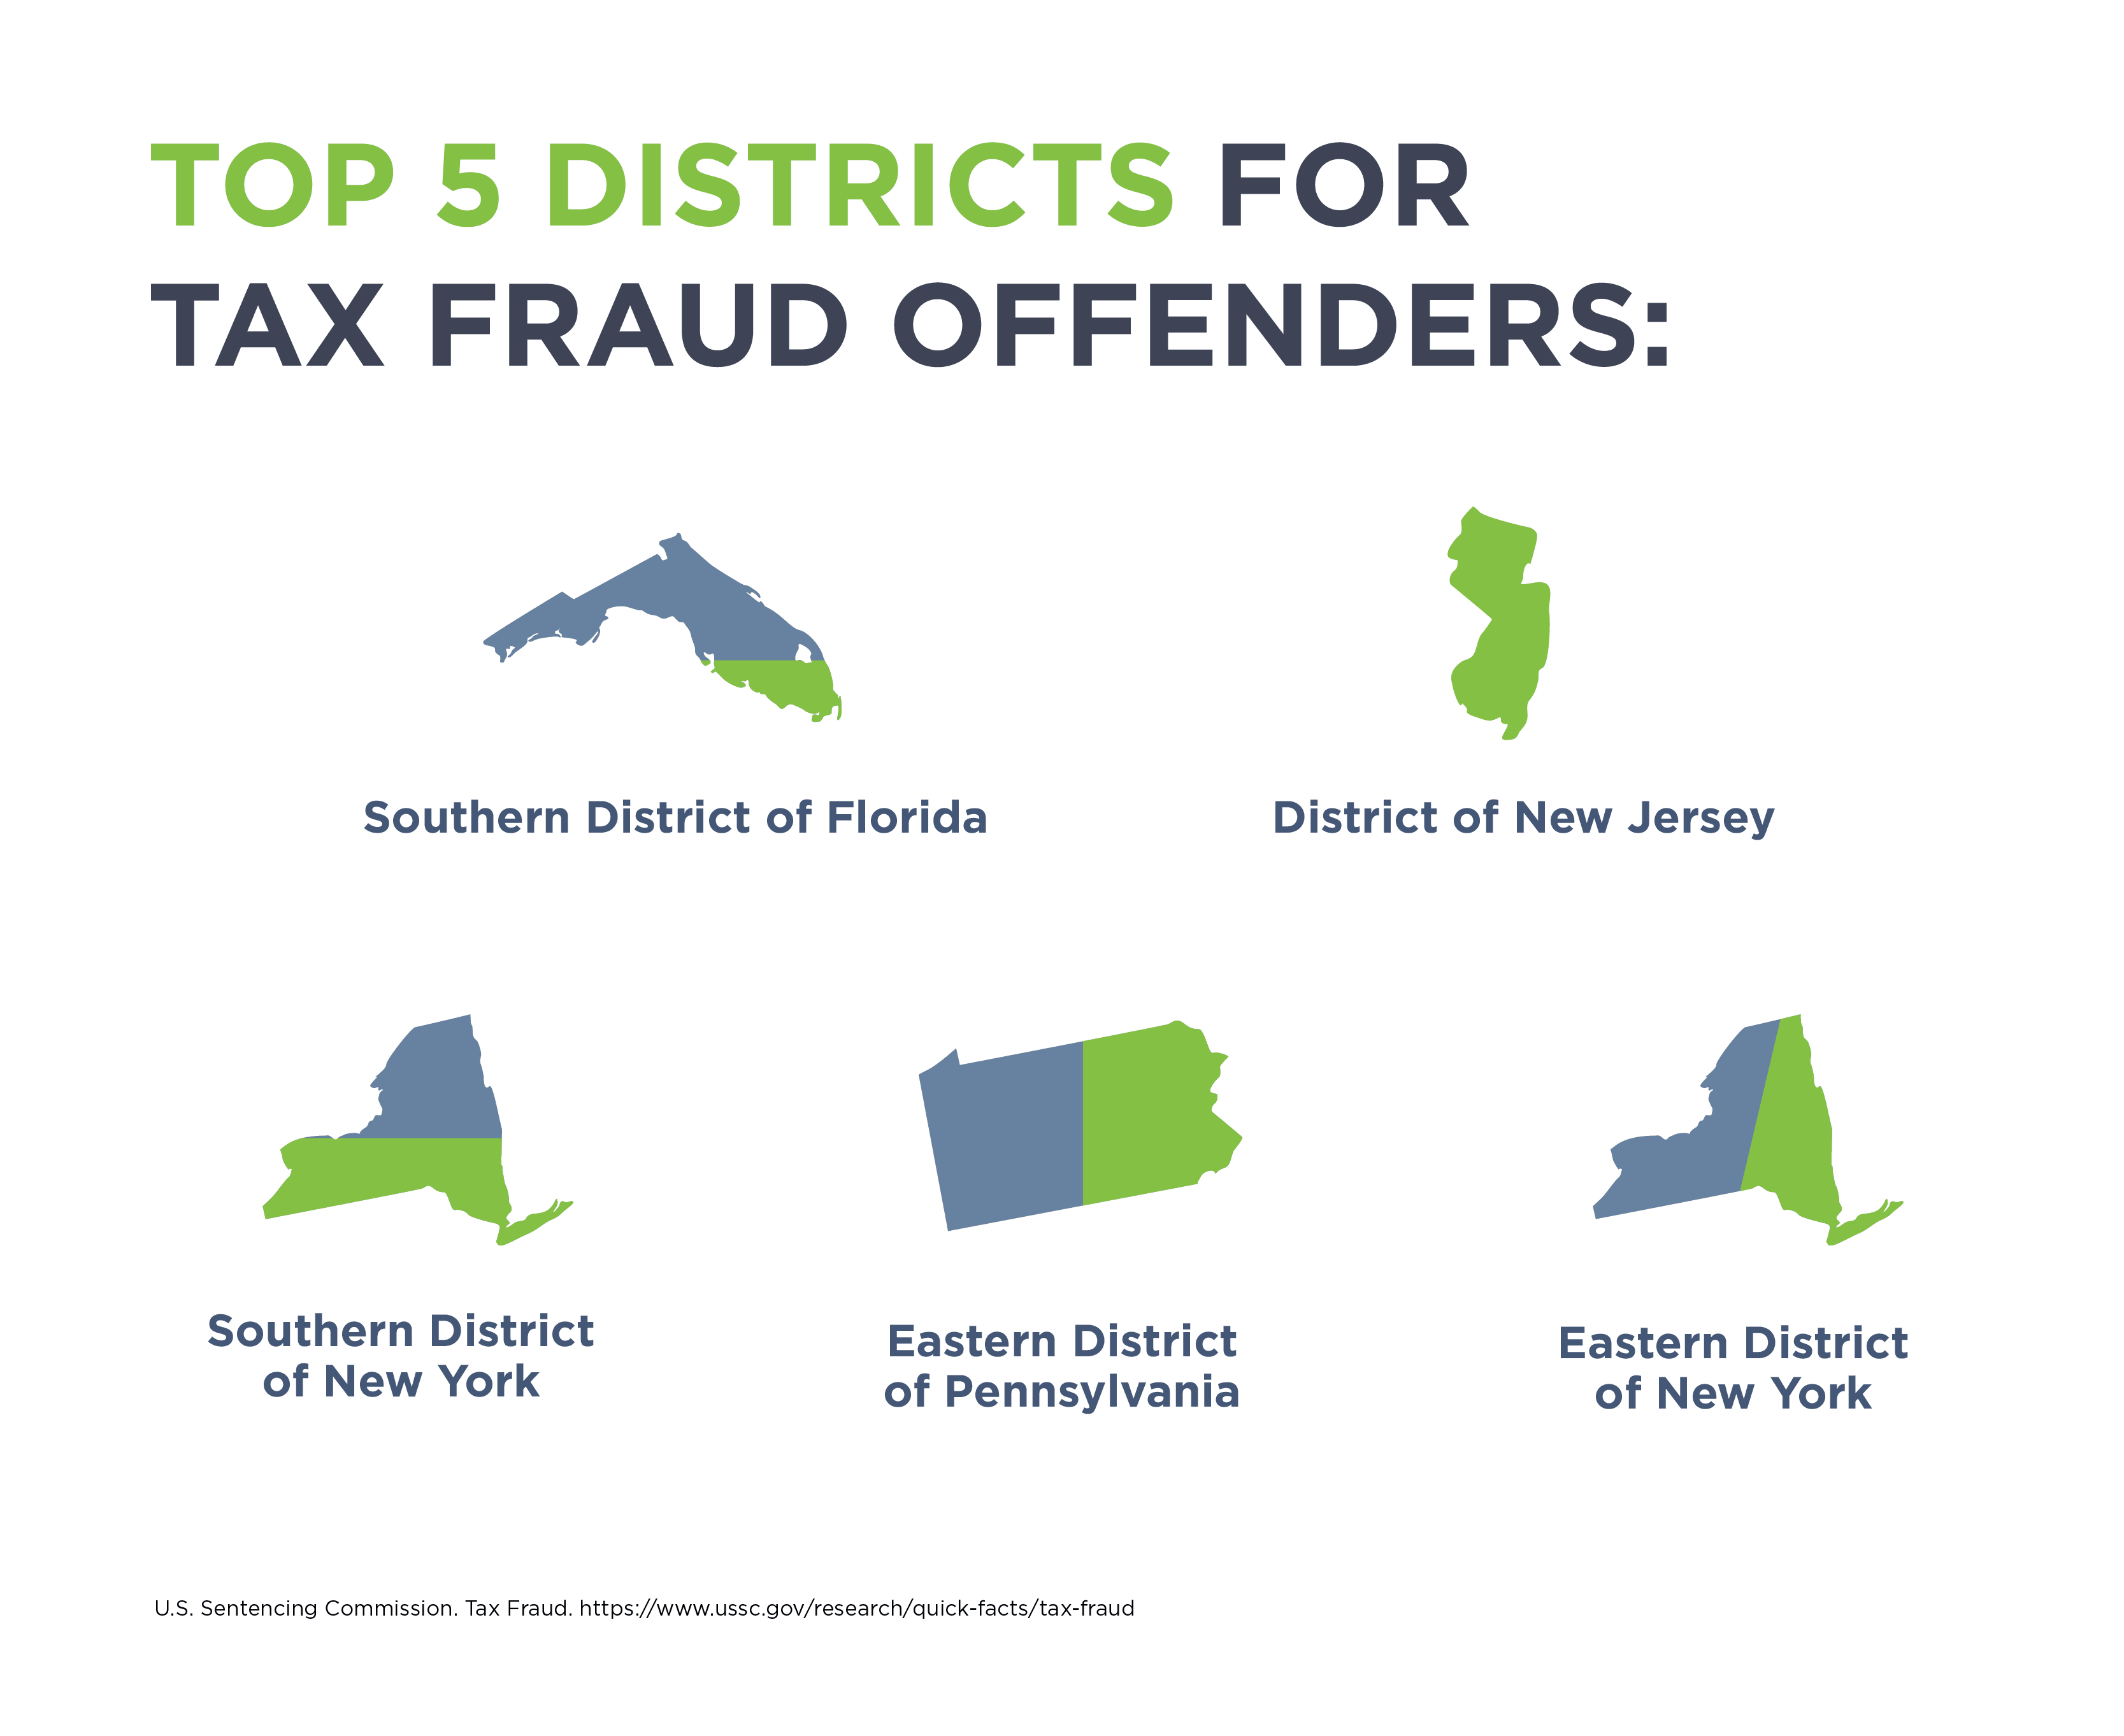 Illustration showing the top for districts for tax fraud offenders.